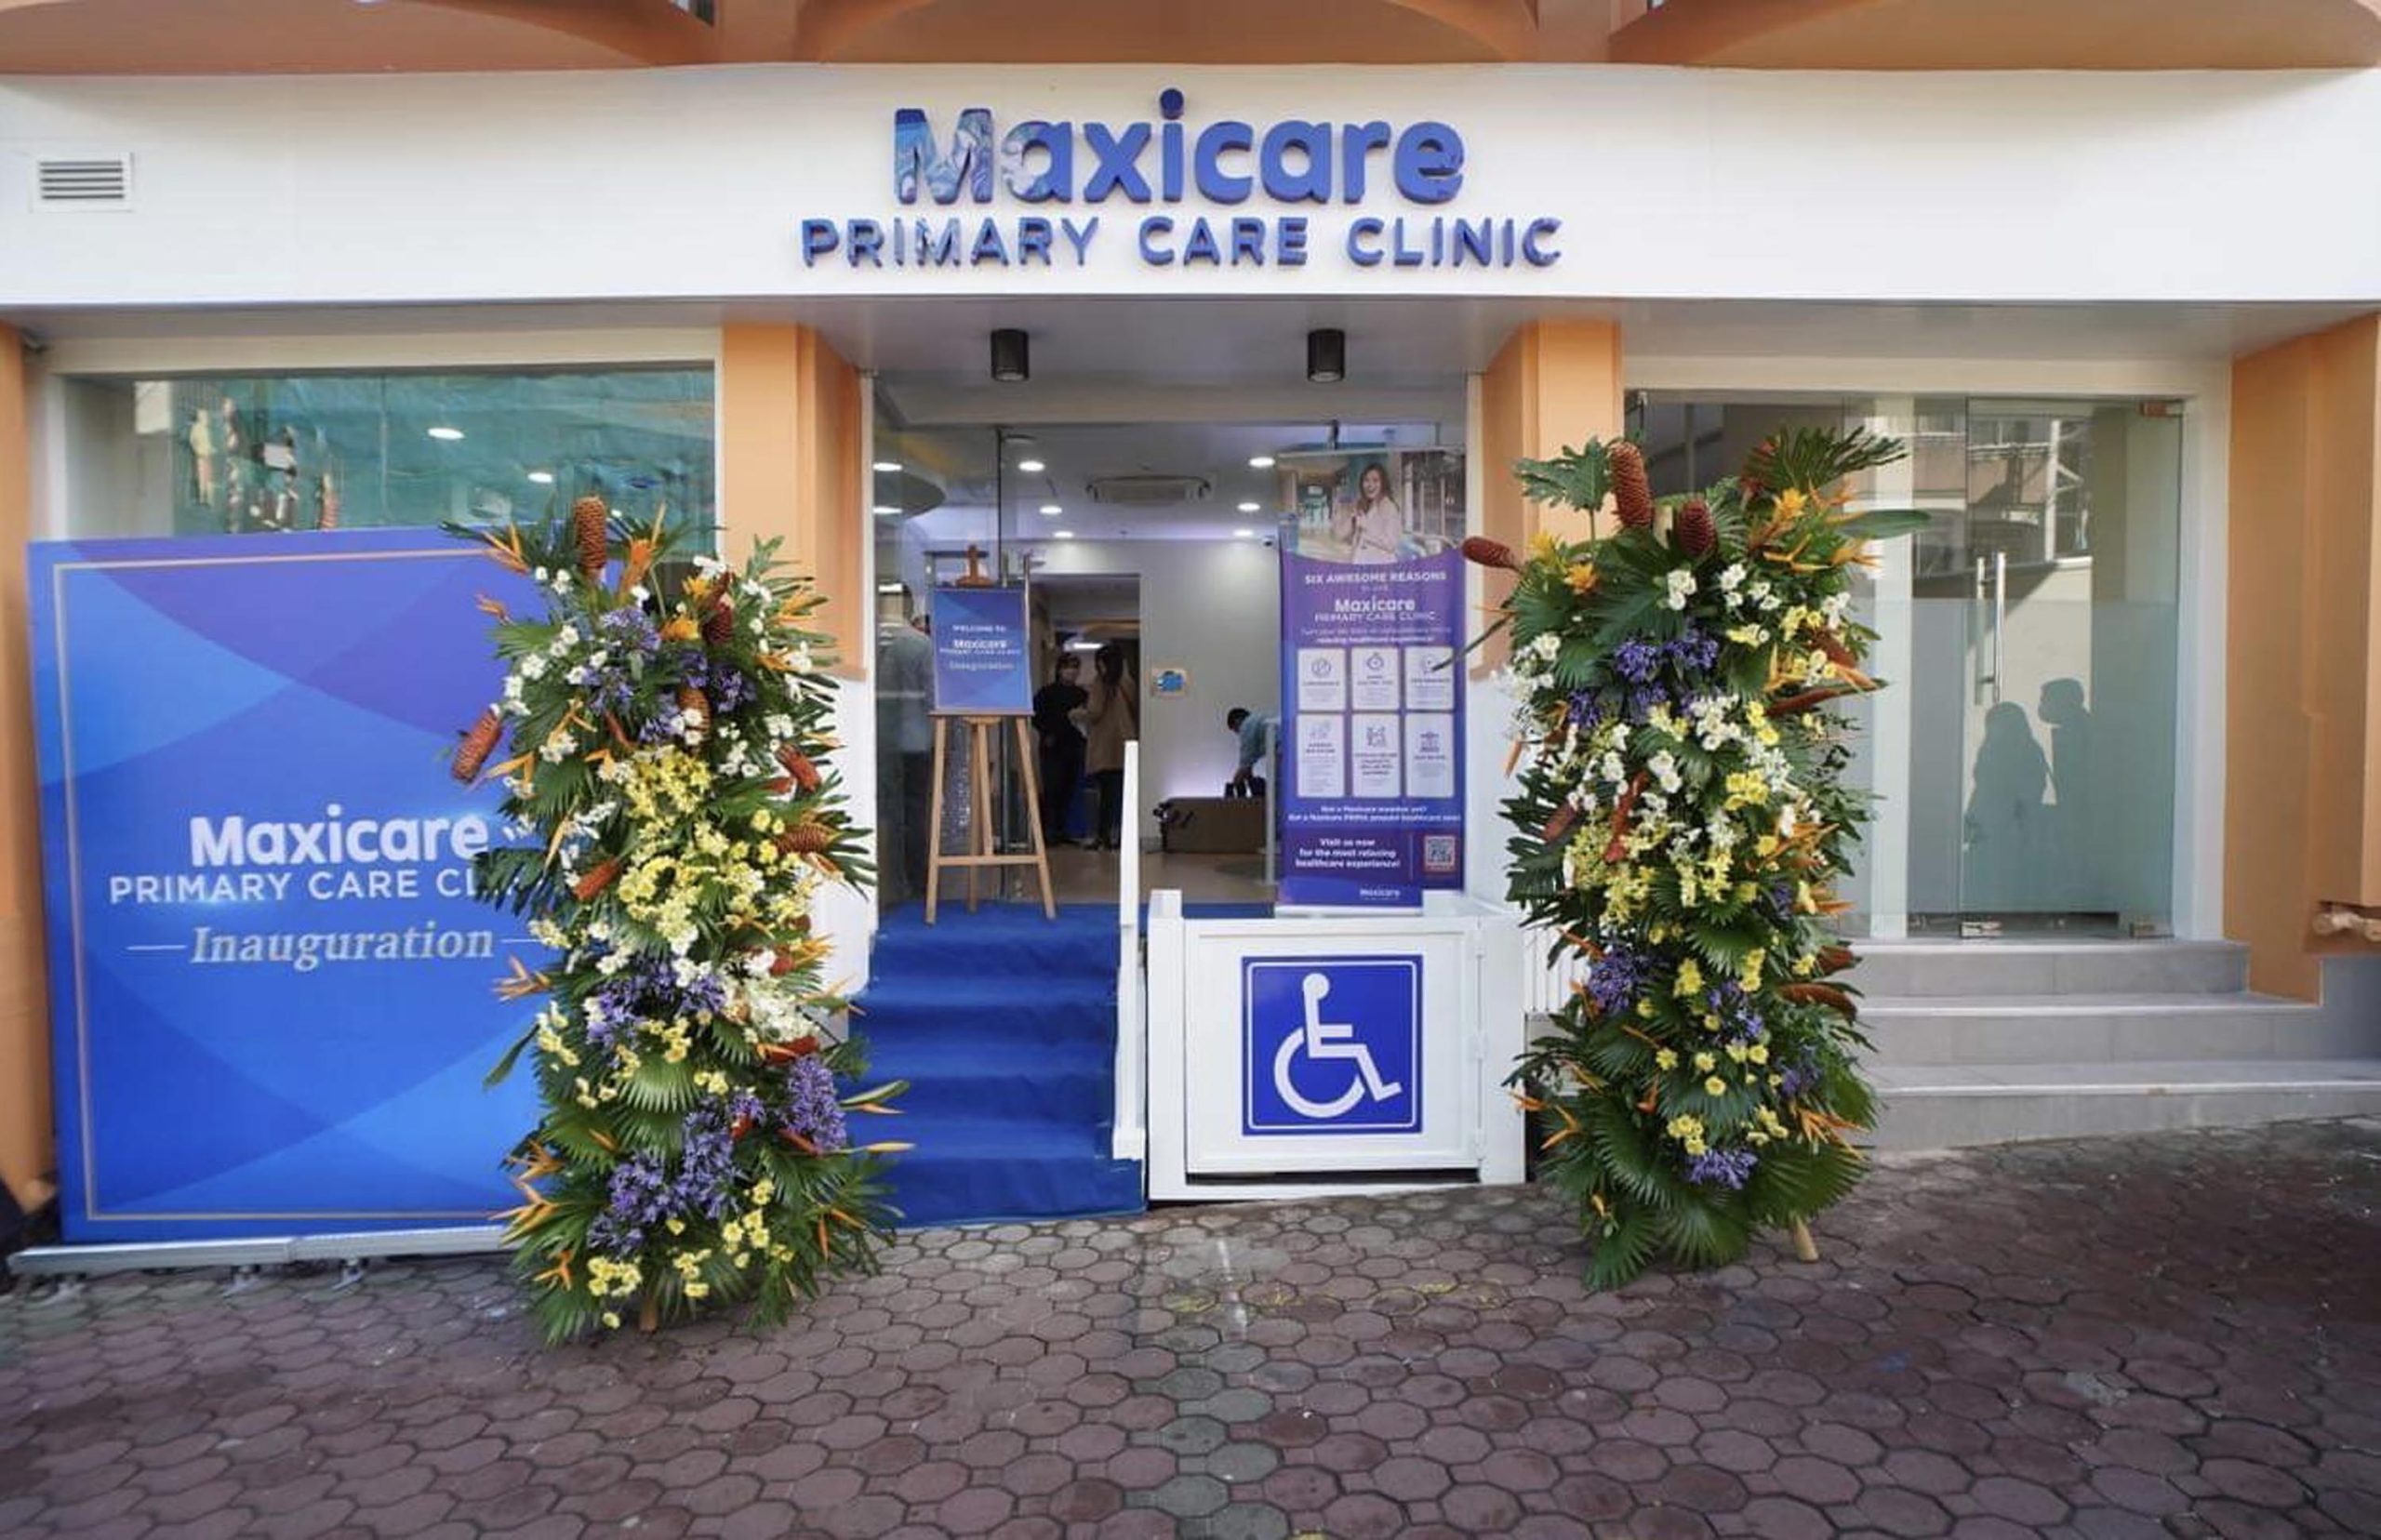 Maxicare opens new Primary Care Clinics across the Philippines